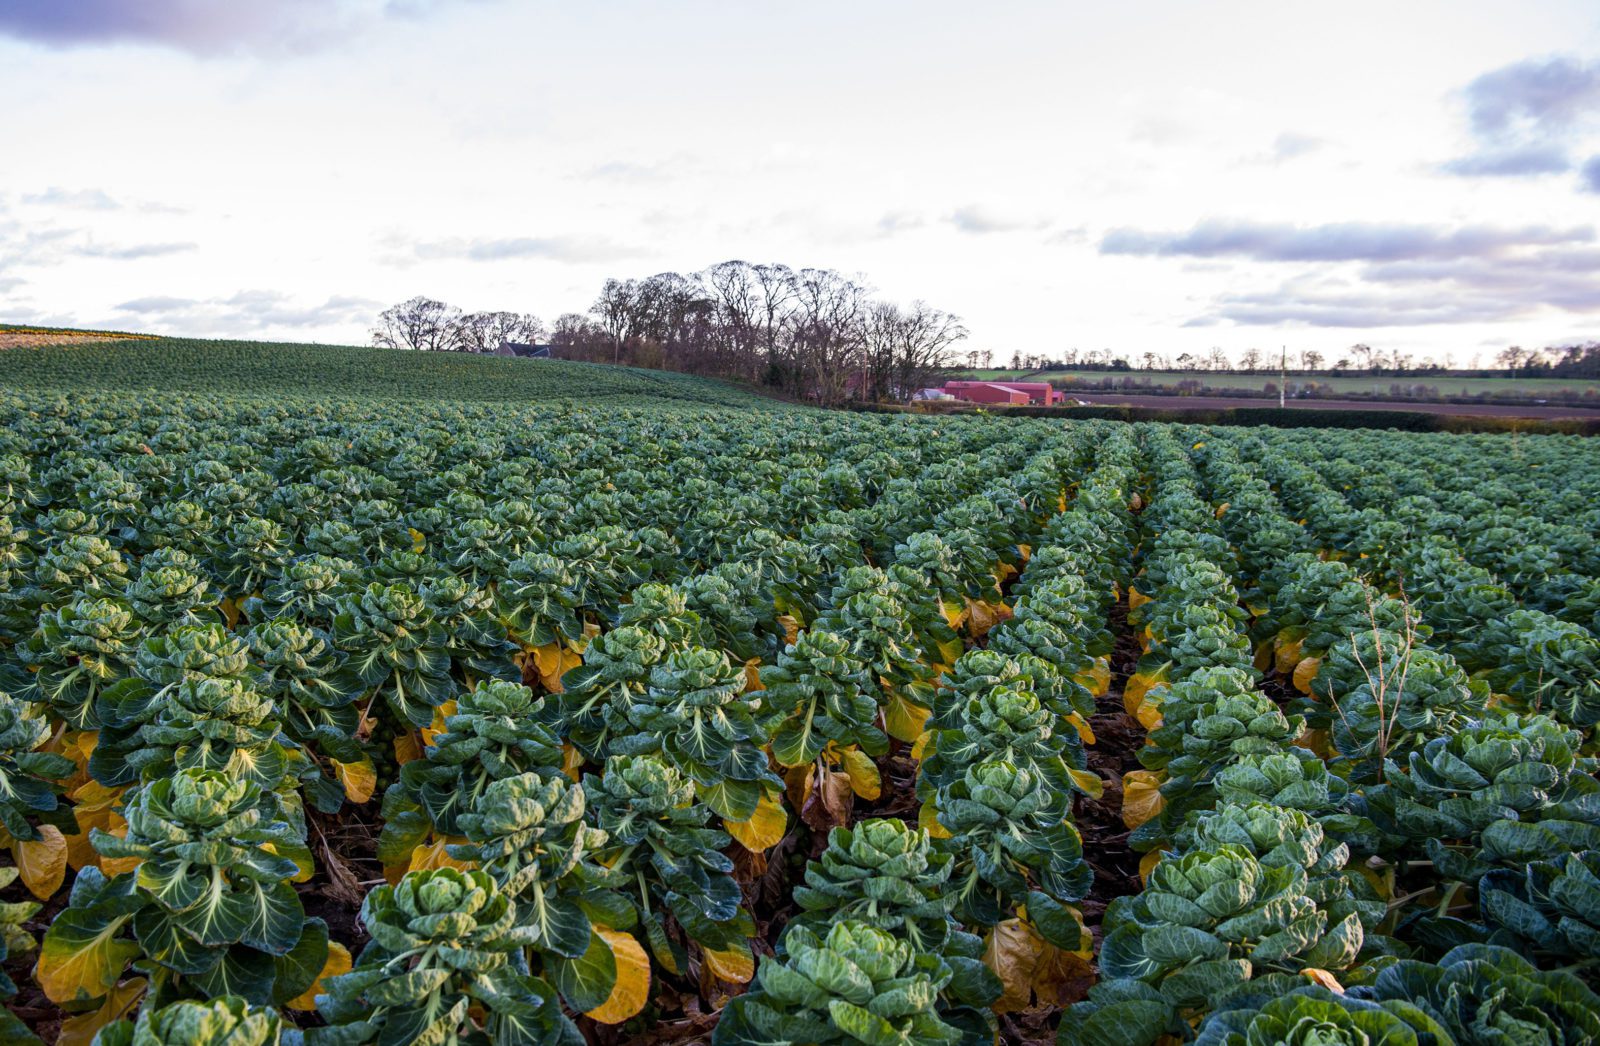 A field of Christmas brassicas, tiny cabbages or the humble brussels sprout